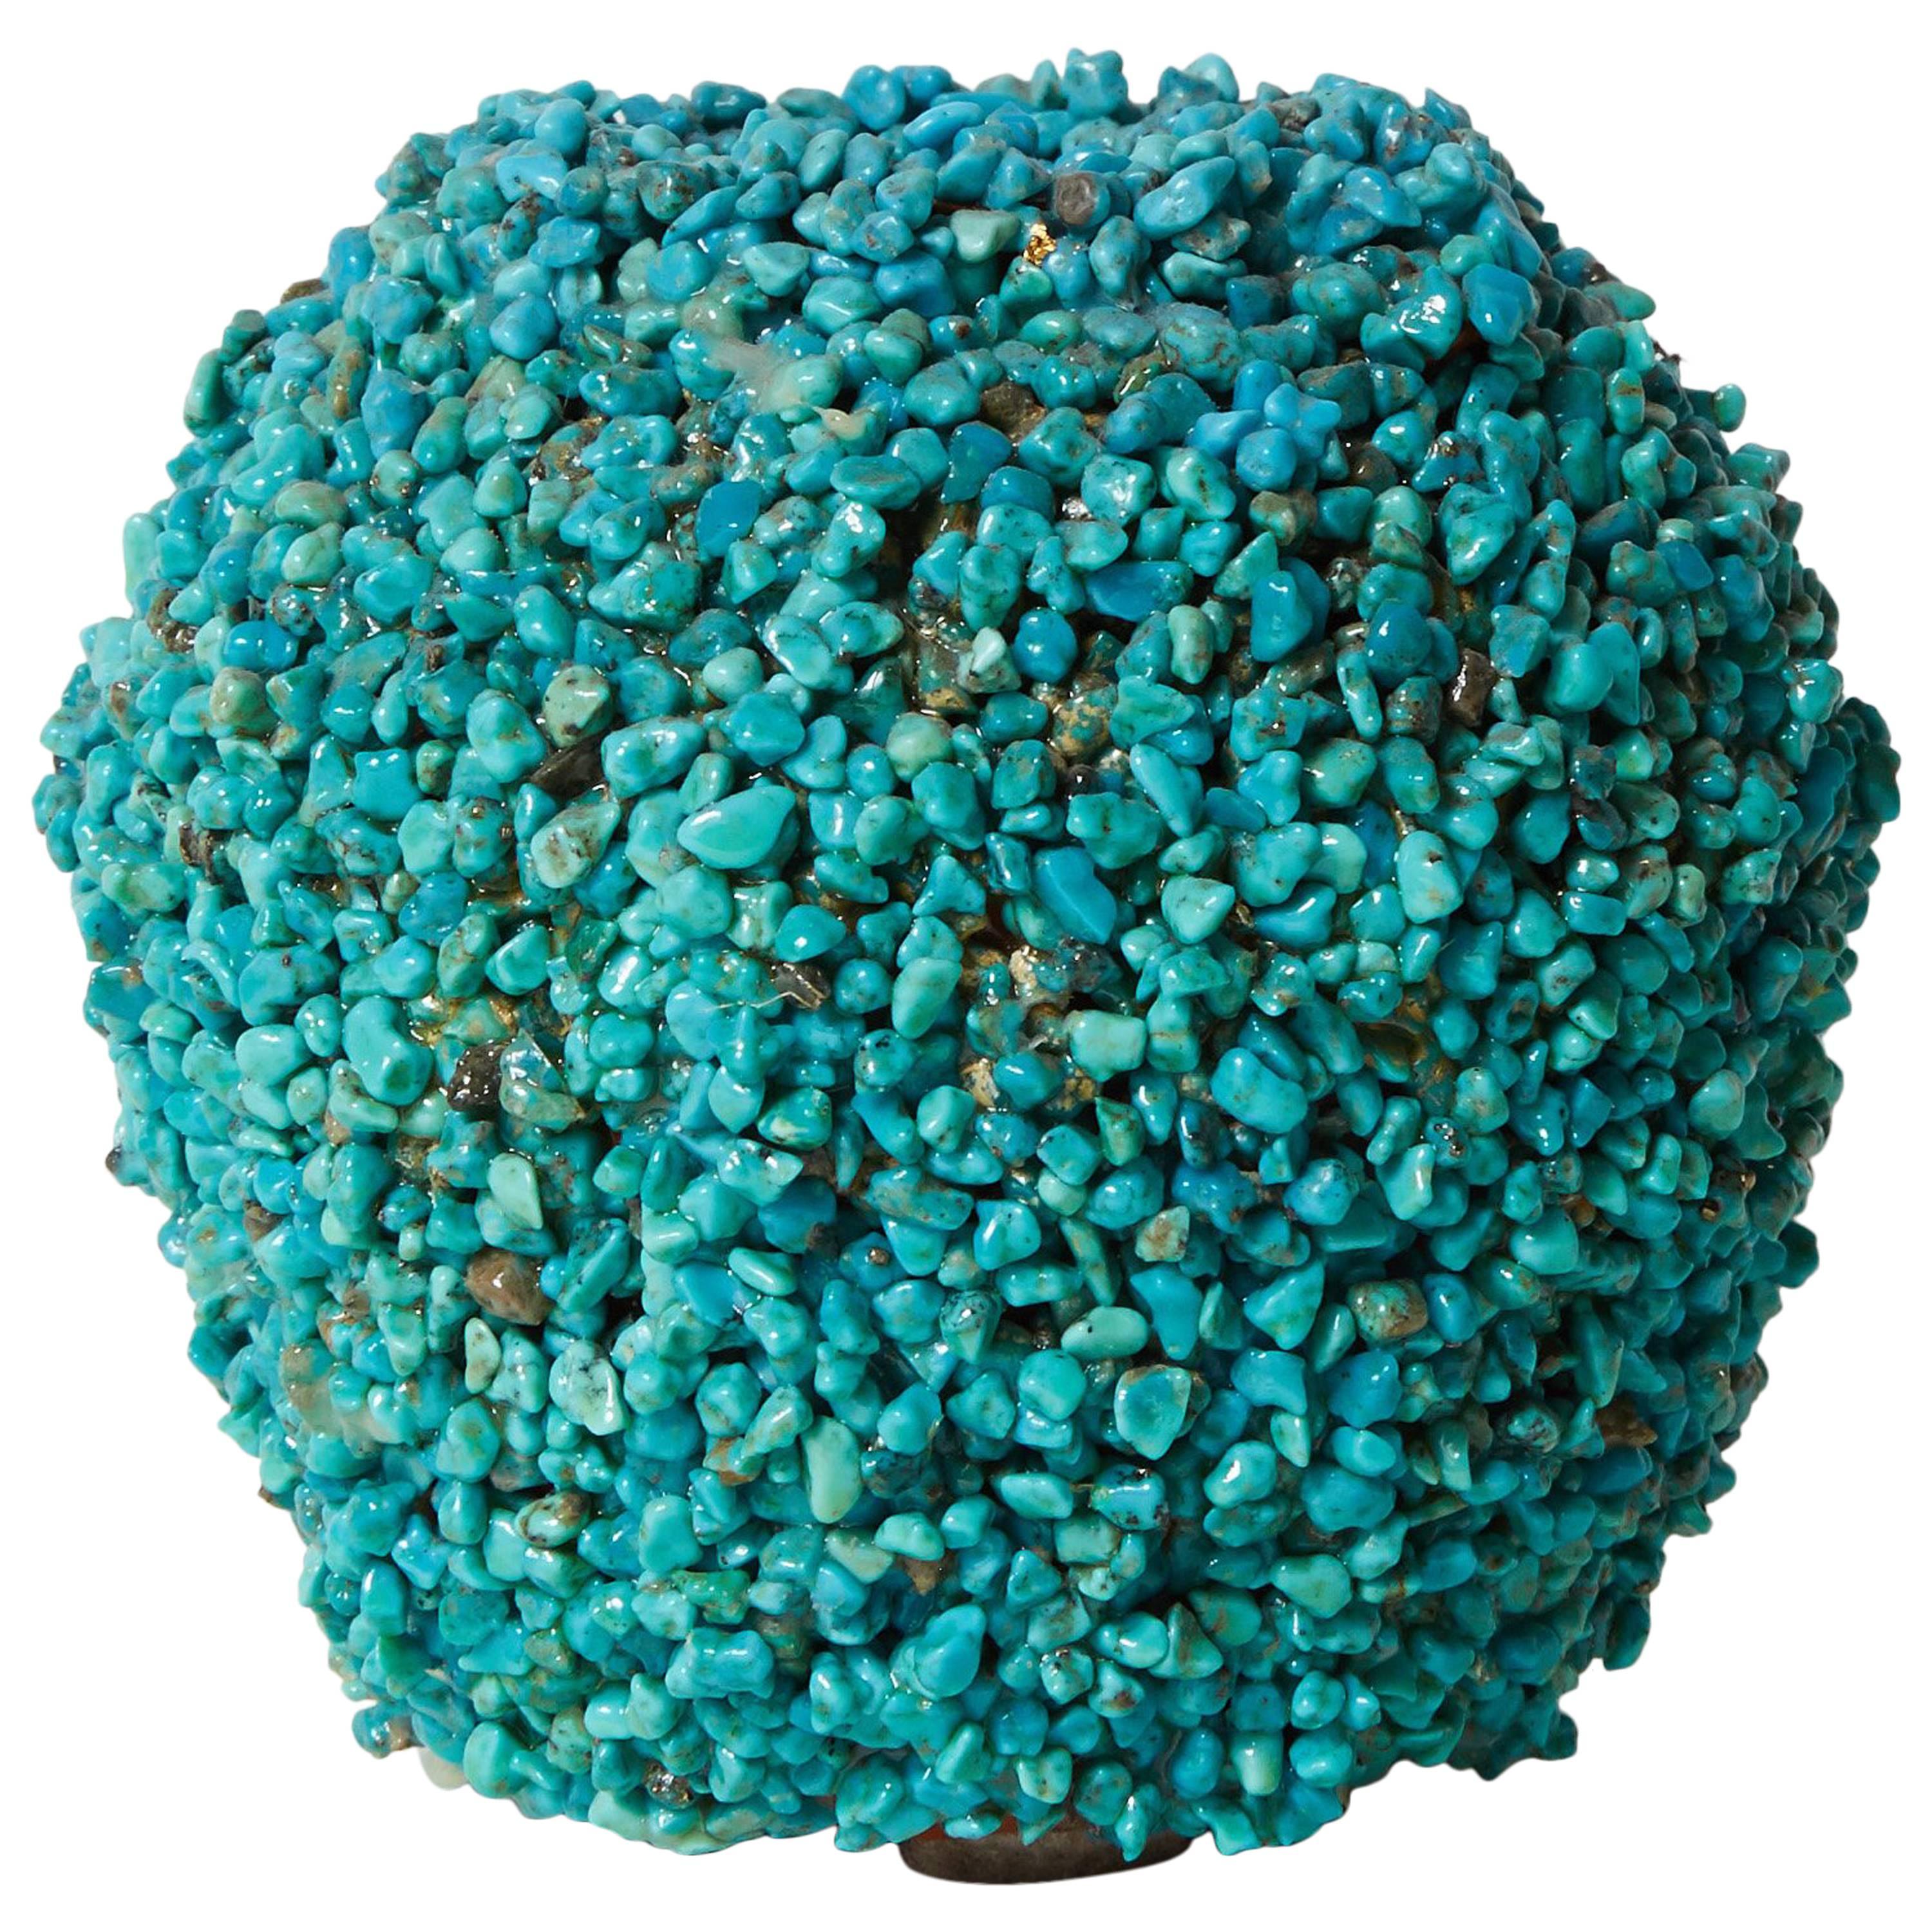 Turquoise Vase For Sale